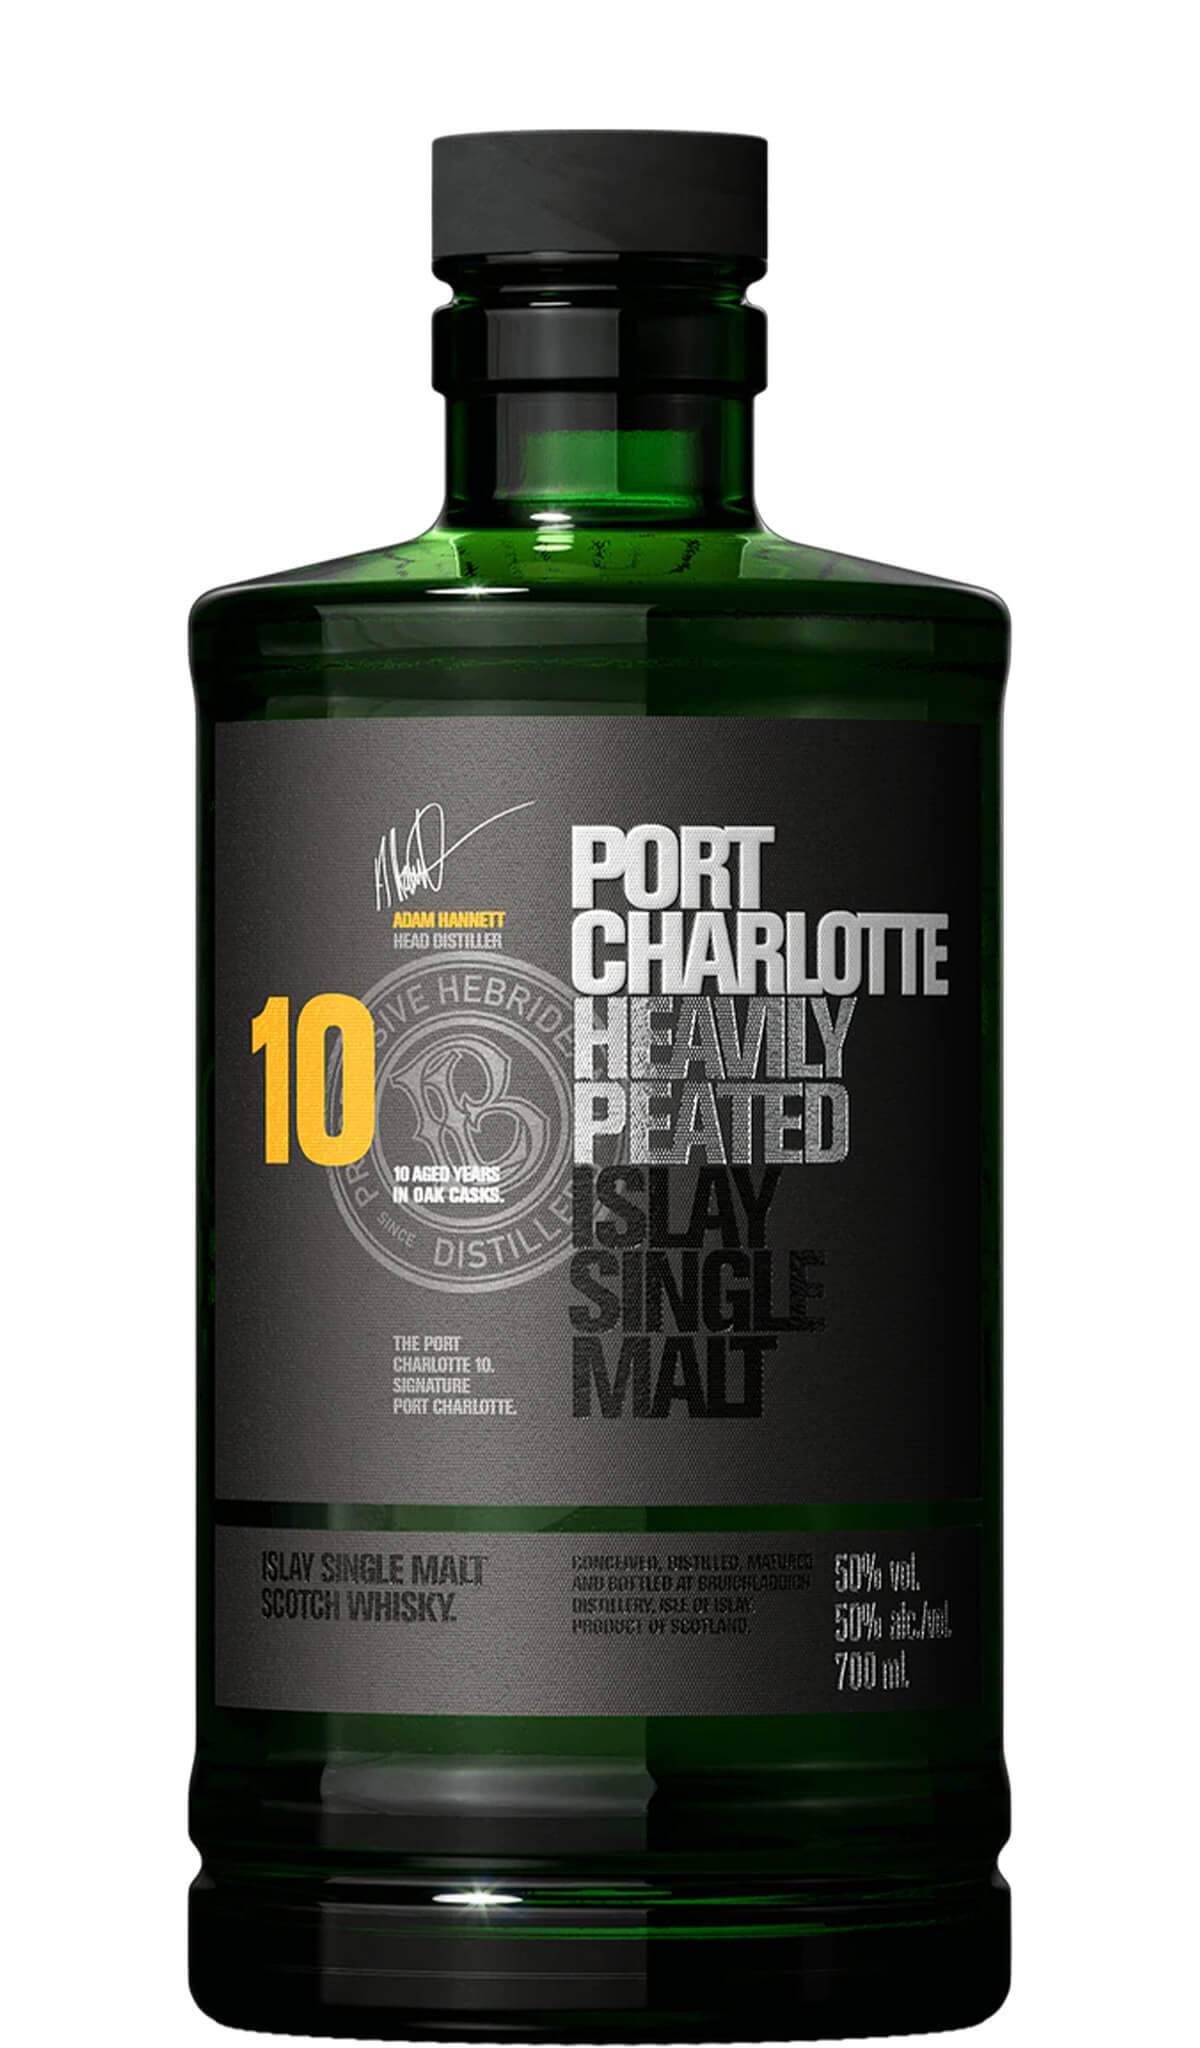 Find out more or buy Bruichladdich Port Charlotte 10 Heavily Pleated Islay Whisky online at Wine Sellers Direct - Australia’s independent liquor specialists.